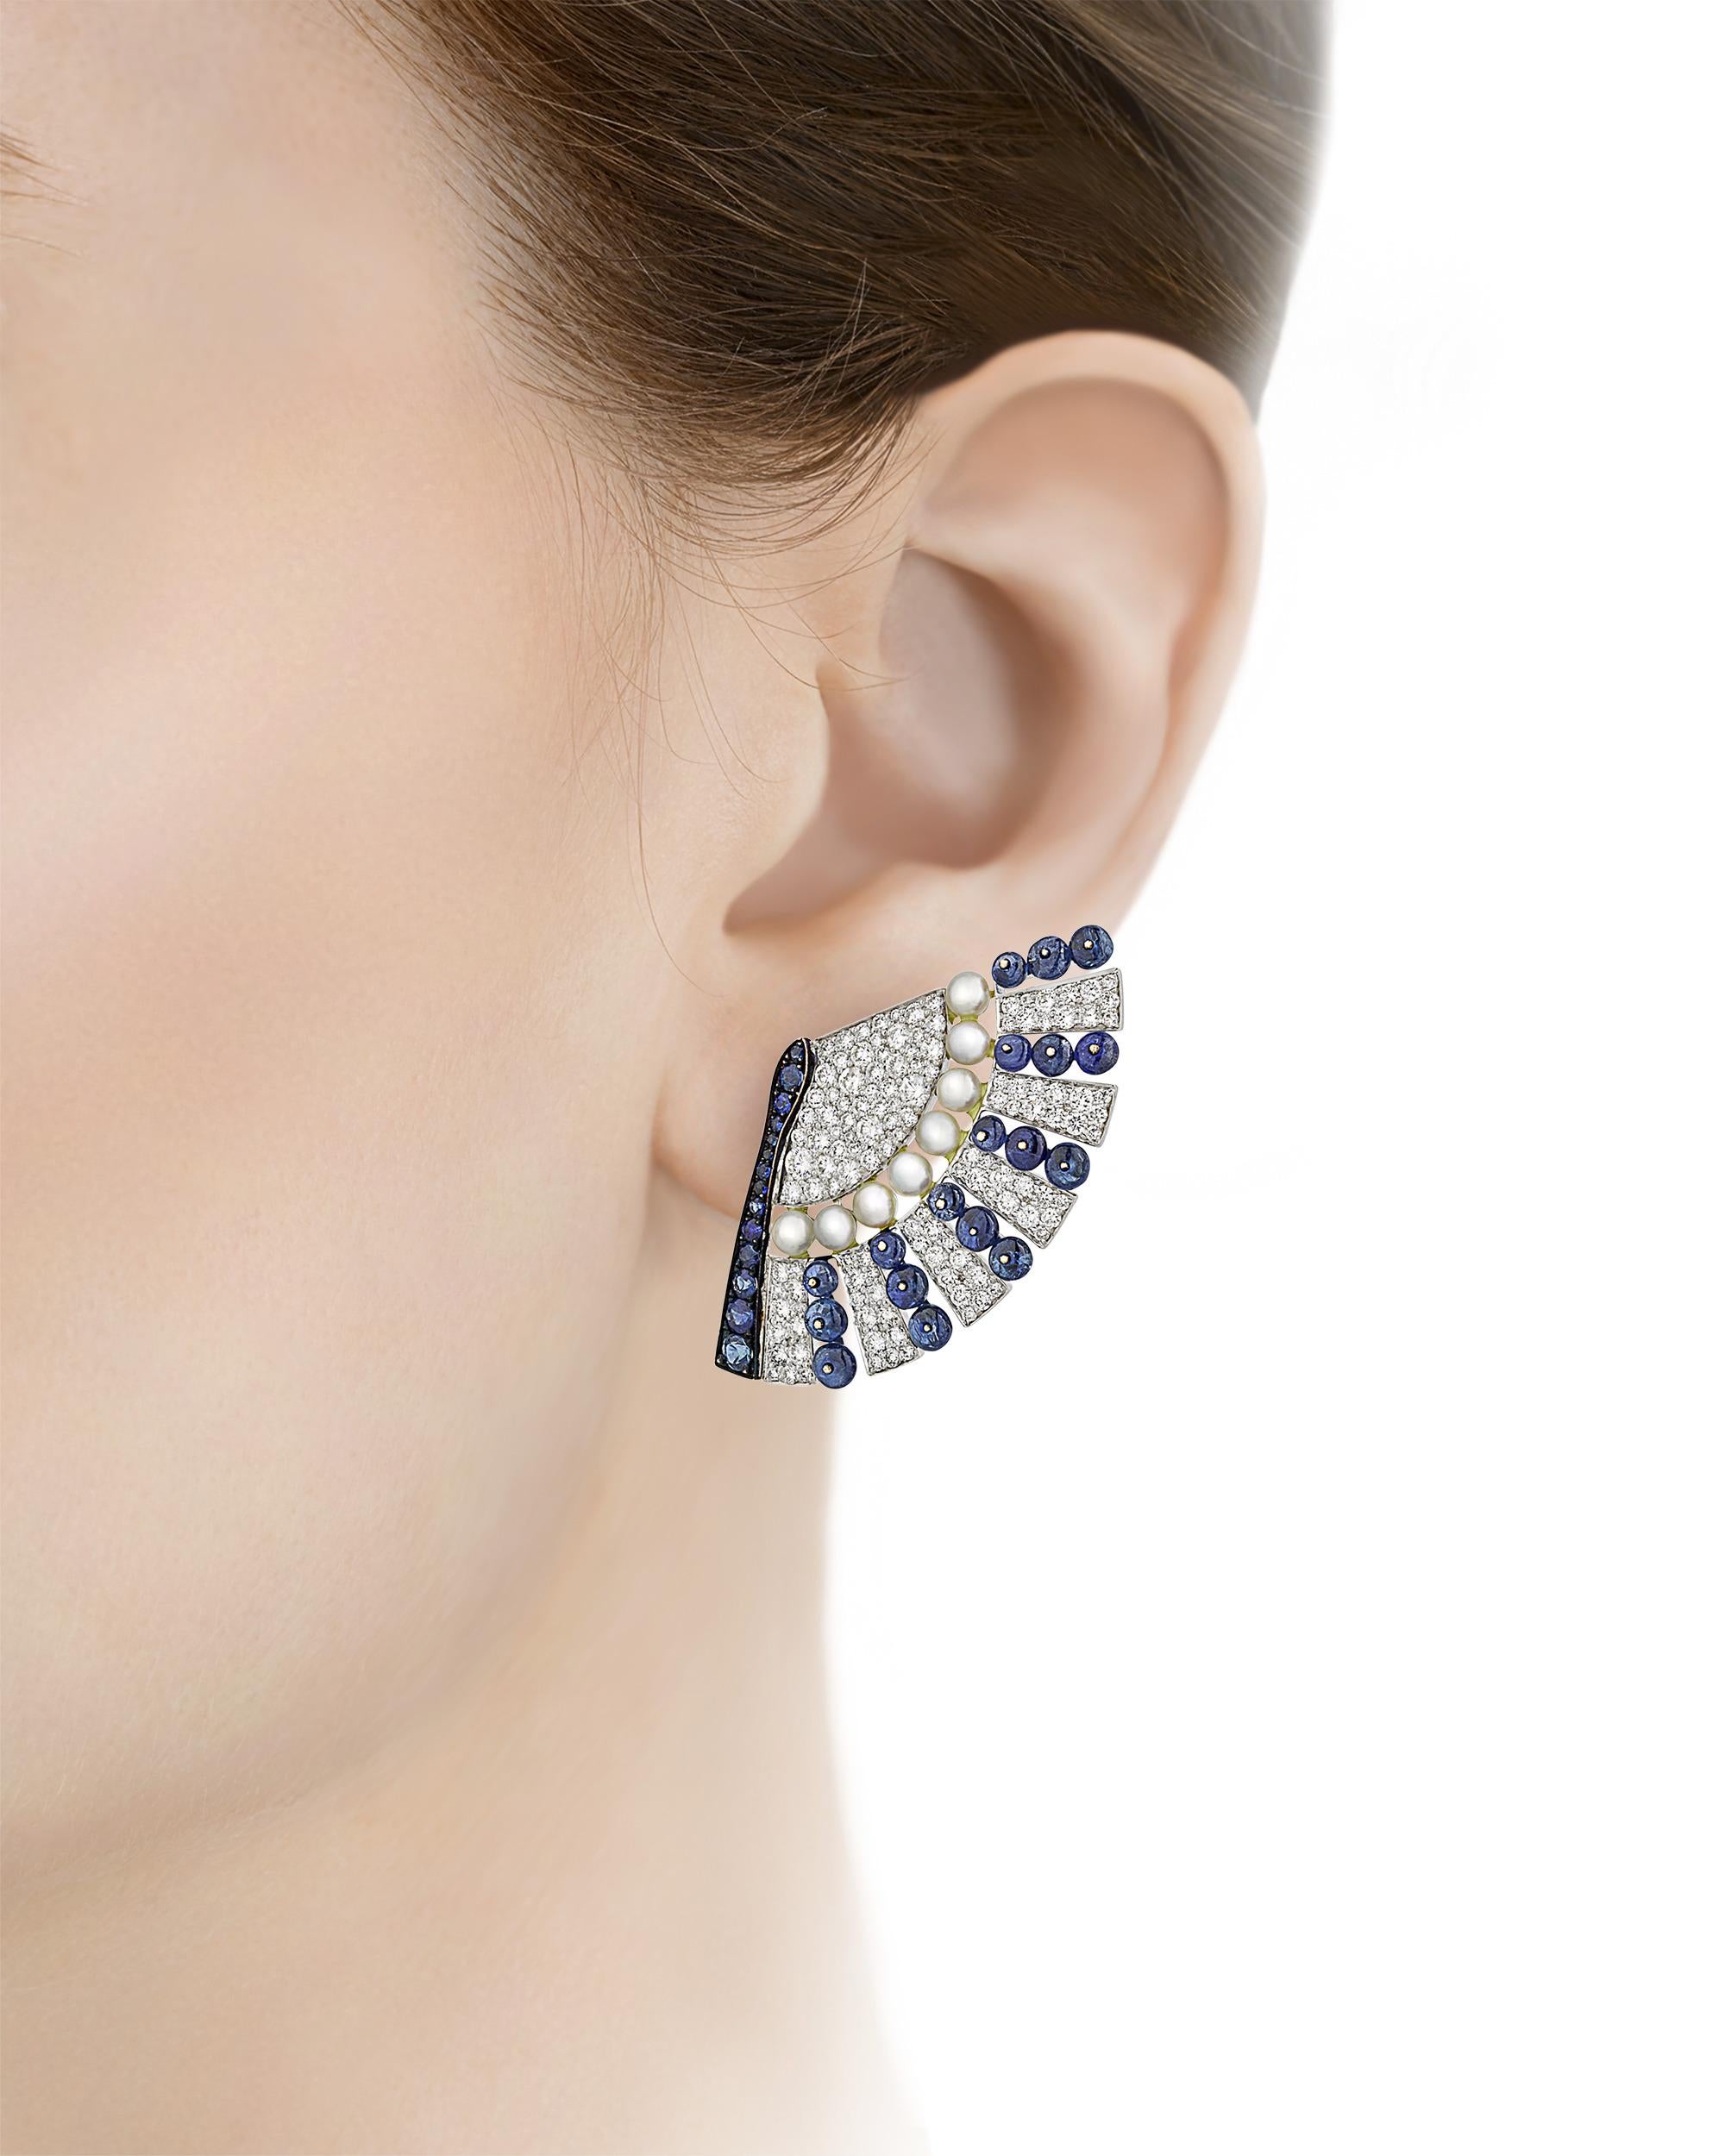 Rich blue sapphires, sparkling diamonds and seed pearls come together in these earrings designed to resemble an elegant lady's fan. The sapphires total 10.39 carats, and the diamonds weigh 3.81 carats. Set in 18K white gold.

1